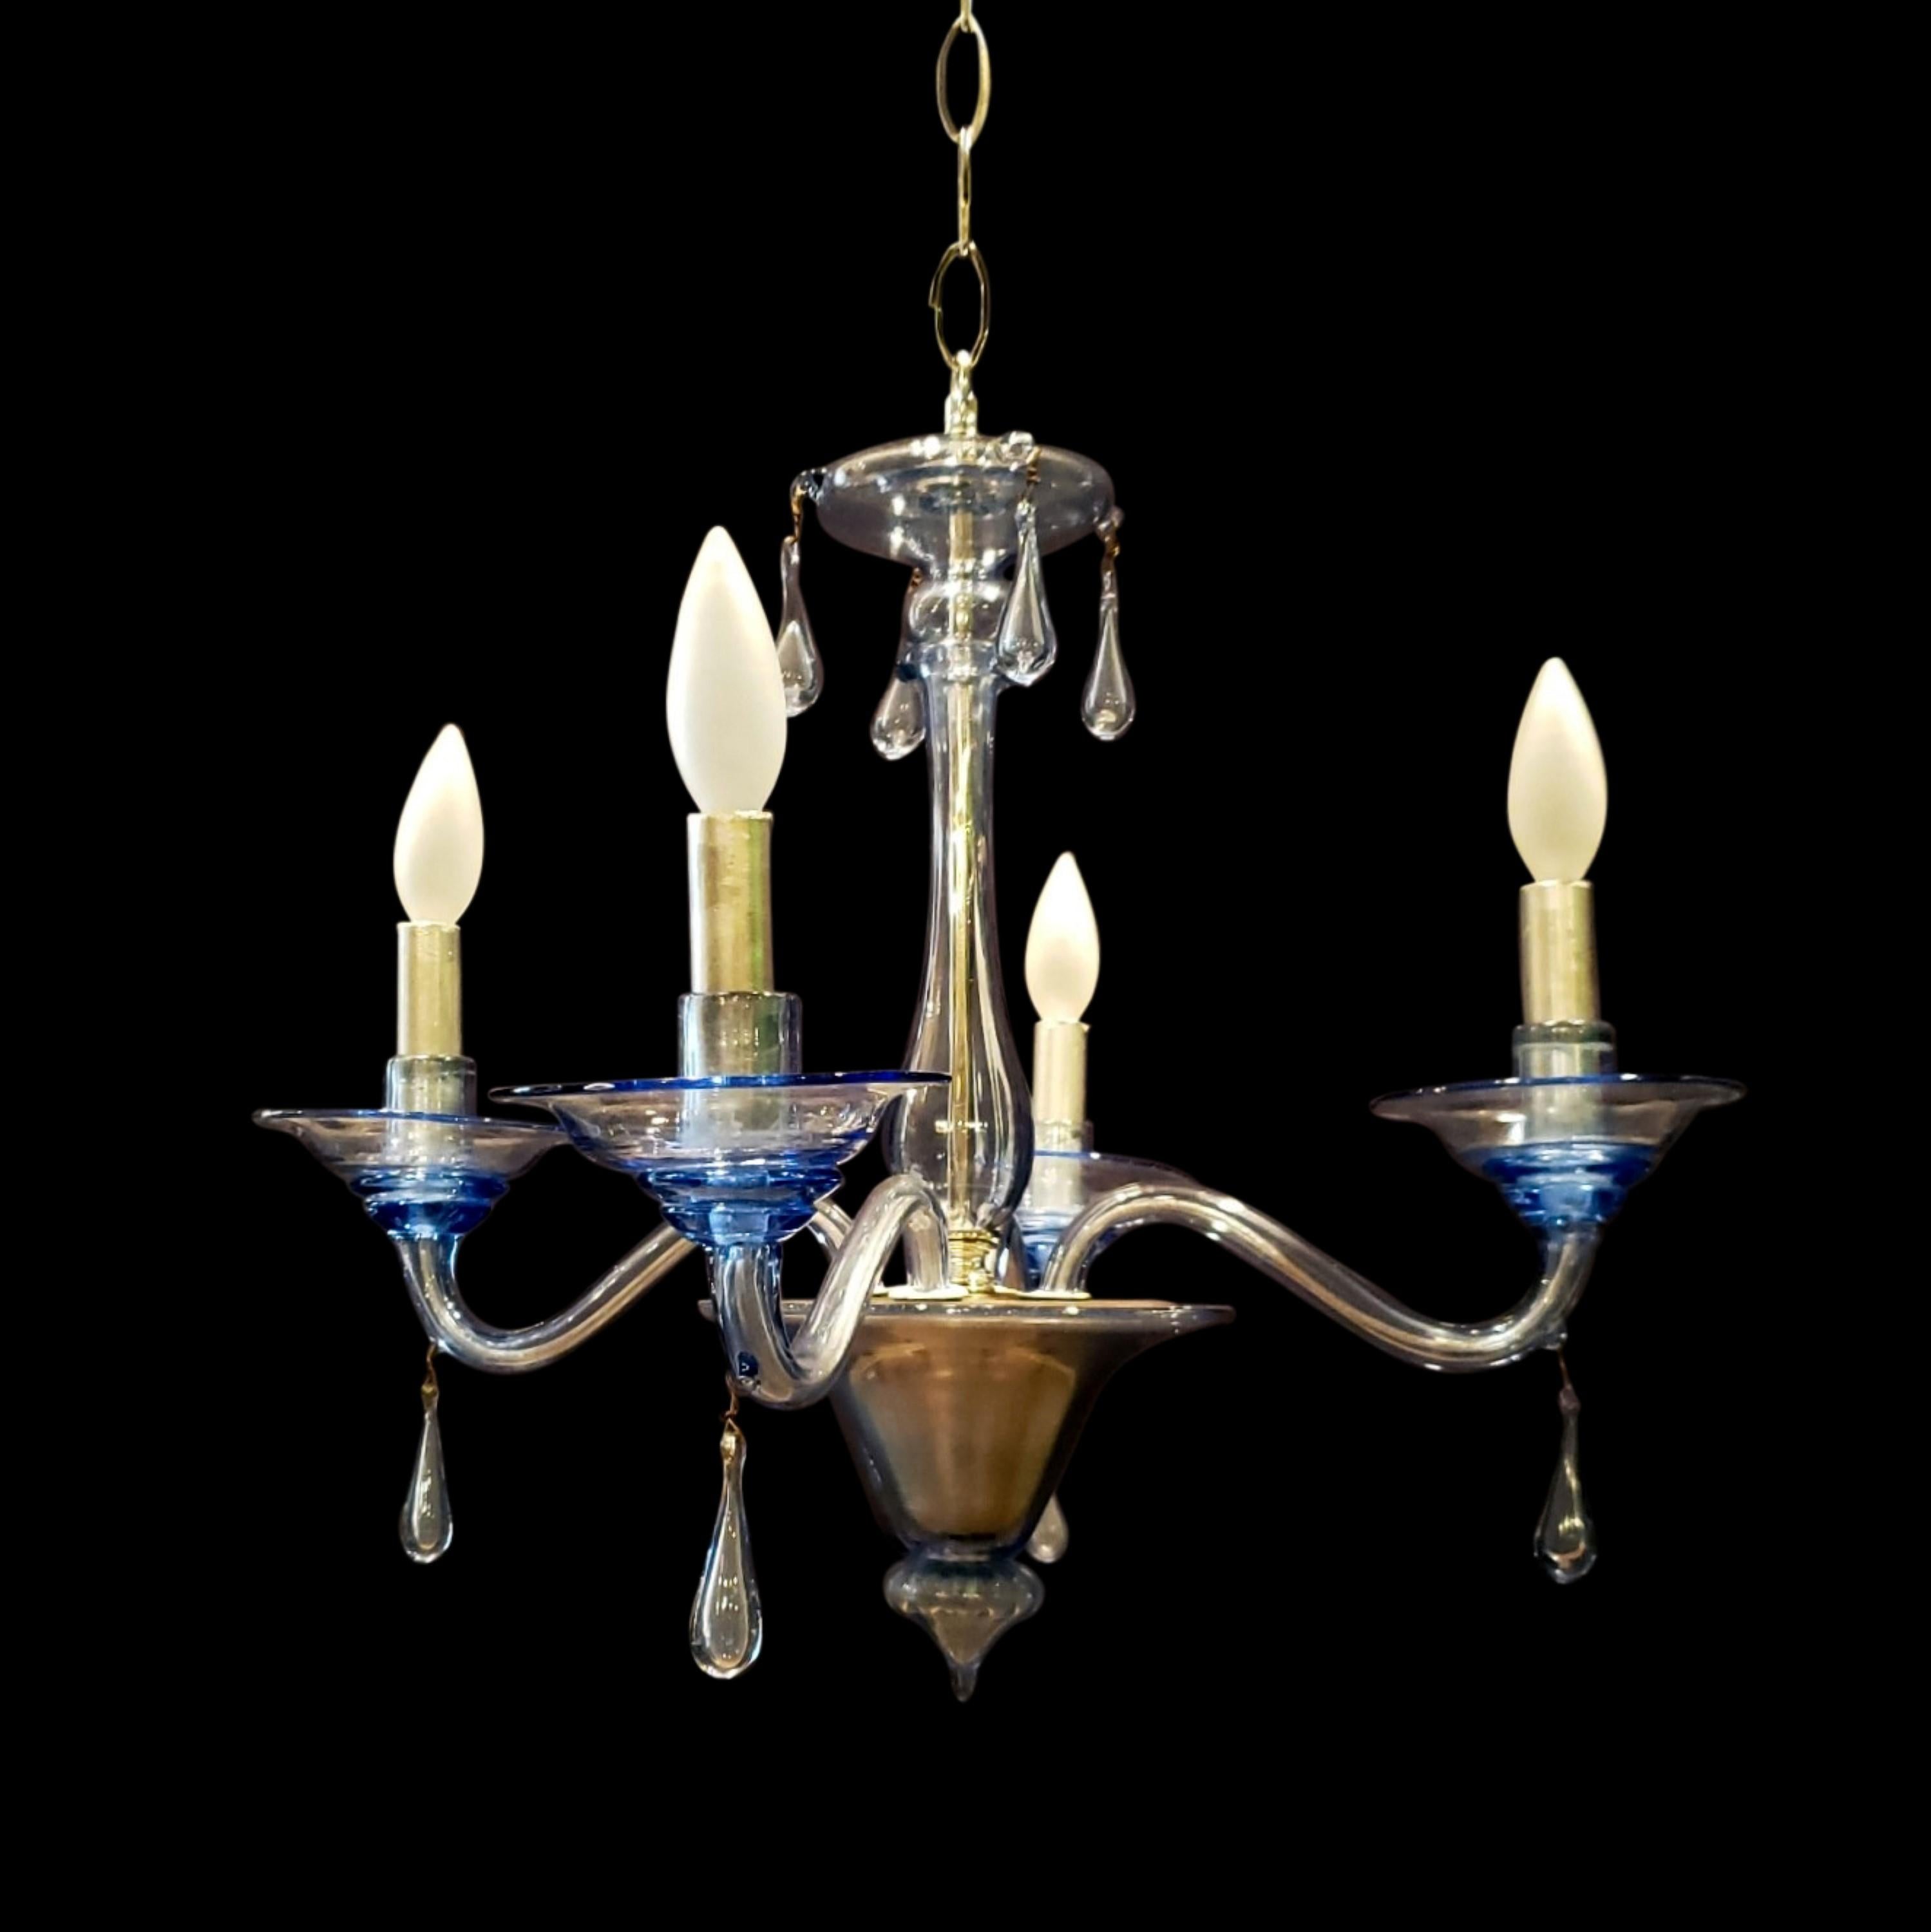 This Murano glass chandelier features a light blue hue and has four arms. This comes rewired and ready to install. Ships disassembled. Cleaned and restored. Please note, this item is located in our Scranton, PA location.